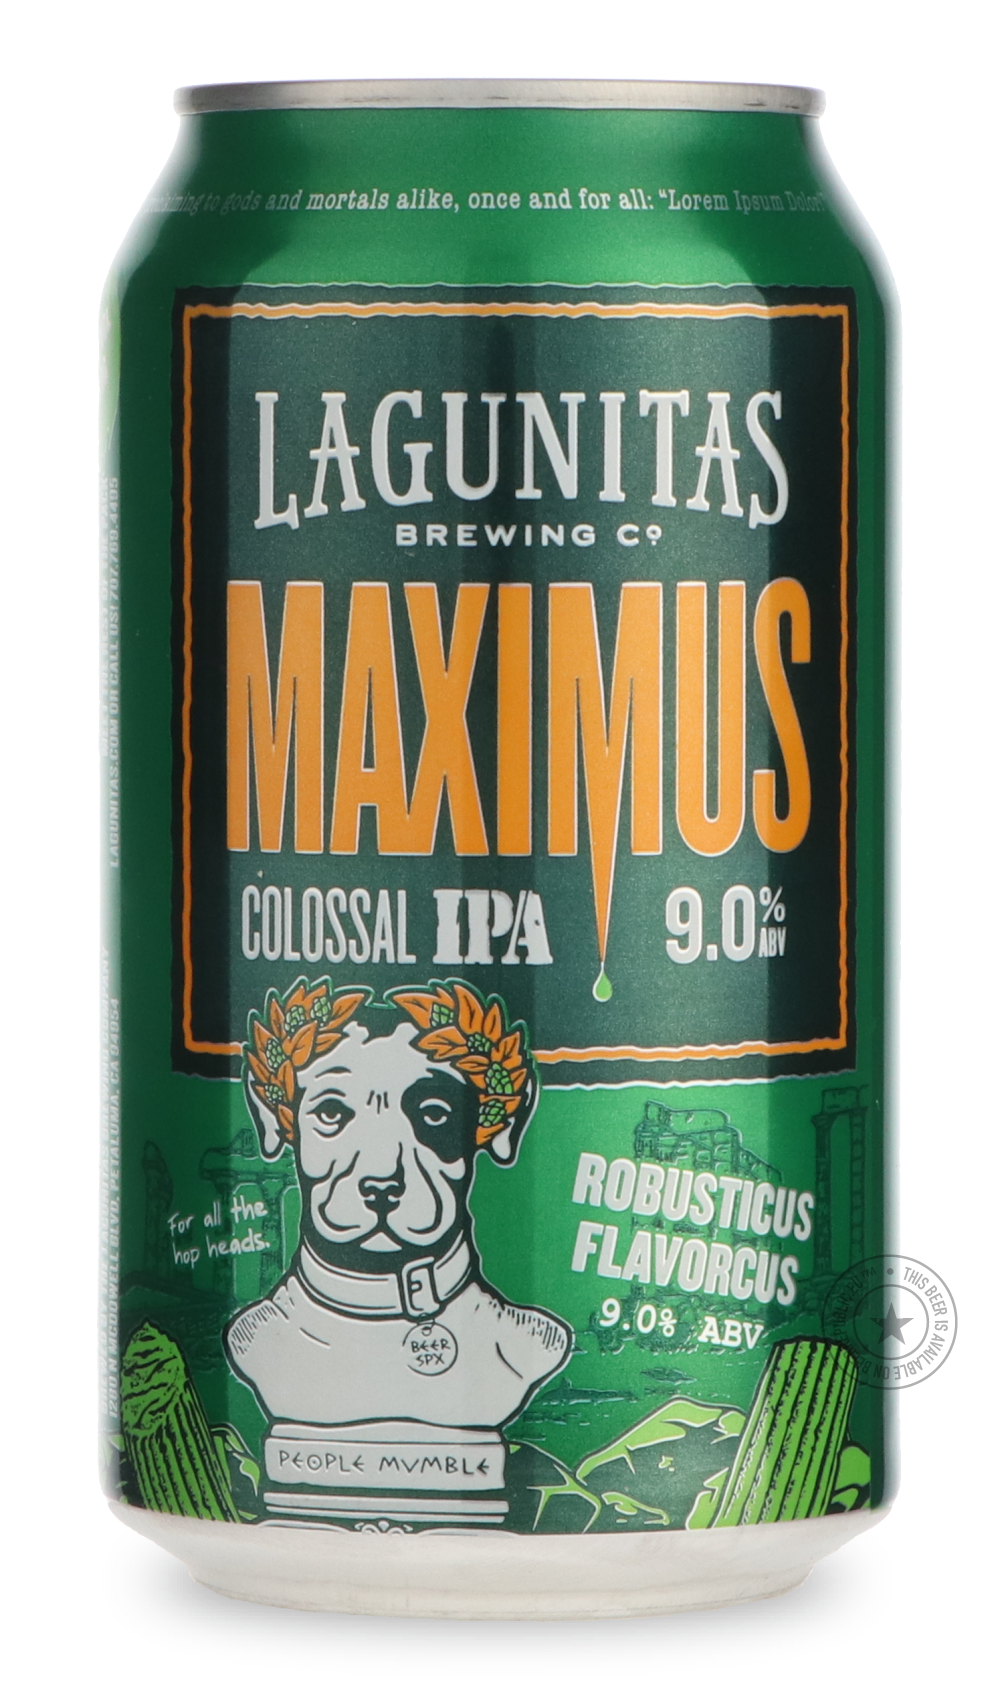 -Lagunitas- Maximus Colossal IPA-IPA- Only @ Beer Republic - The best online beer store for American & Canadian craft beer - Buy beer online from the USA and Canada - Bier online kopen - Amerikaans bier kopen - Craft beer store - Craft beer kopen - Amerikanisch bier kaufen - Bier online kaufen - Acheter biere online - IPA - Stout - Porter - New England IPA - Hazy IPA - Imperial Stout - Barrel Aged - Barrel Aged Imperial Stout - Brown - Dark beer - Blond - Blonde - Pilsner - Lager - Wheat - Weizen - Amber - 